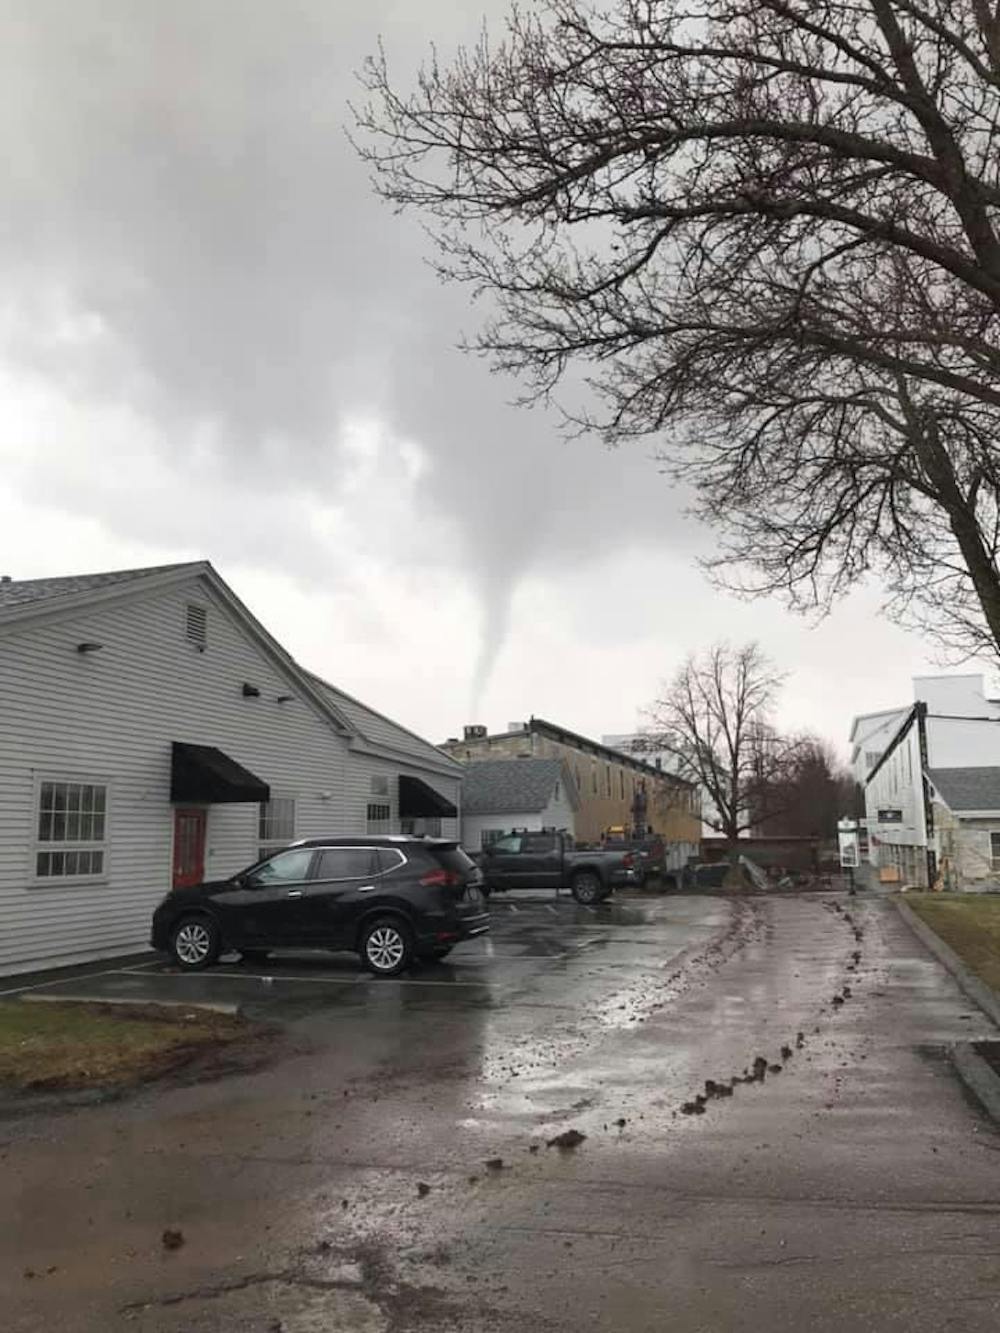 <a href="https://middleburycampus.com/54504/local/tornado-touches-down-in-middlebury-injuring-two/attachment/exddz_hwuagjgo3/" rel="attachment wp-att-54505"></a> <span class="photocreditinline">Courtesy of The Marble Works Partnership</span><br />The tornado that touched down on Friday reached a width of 75 yards.